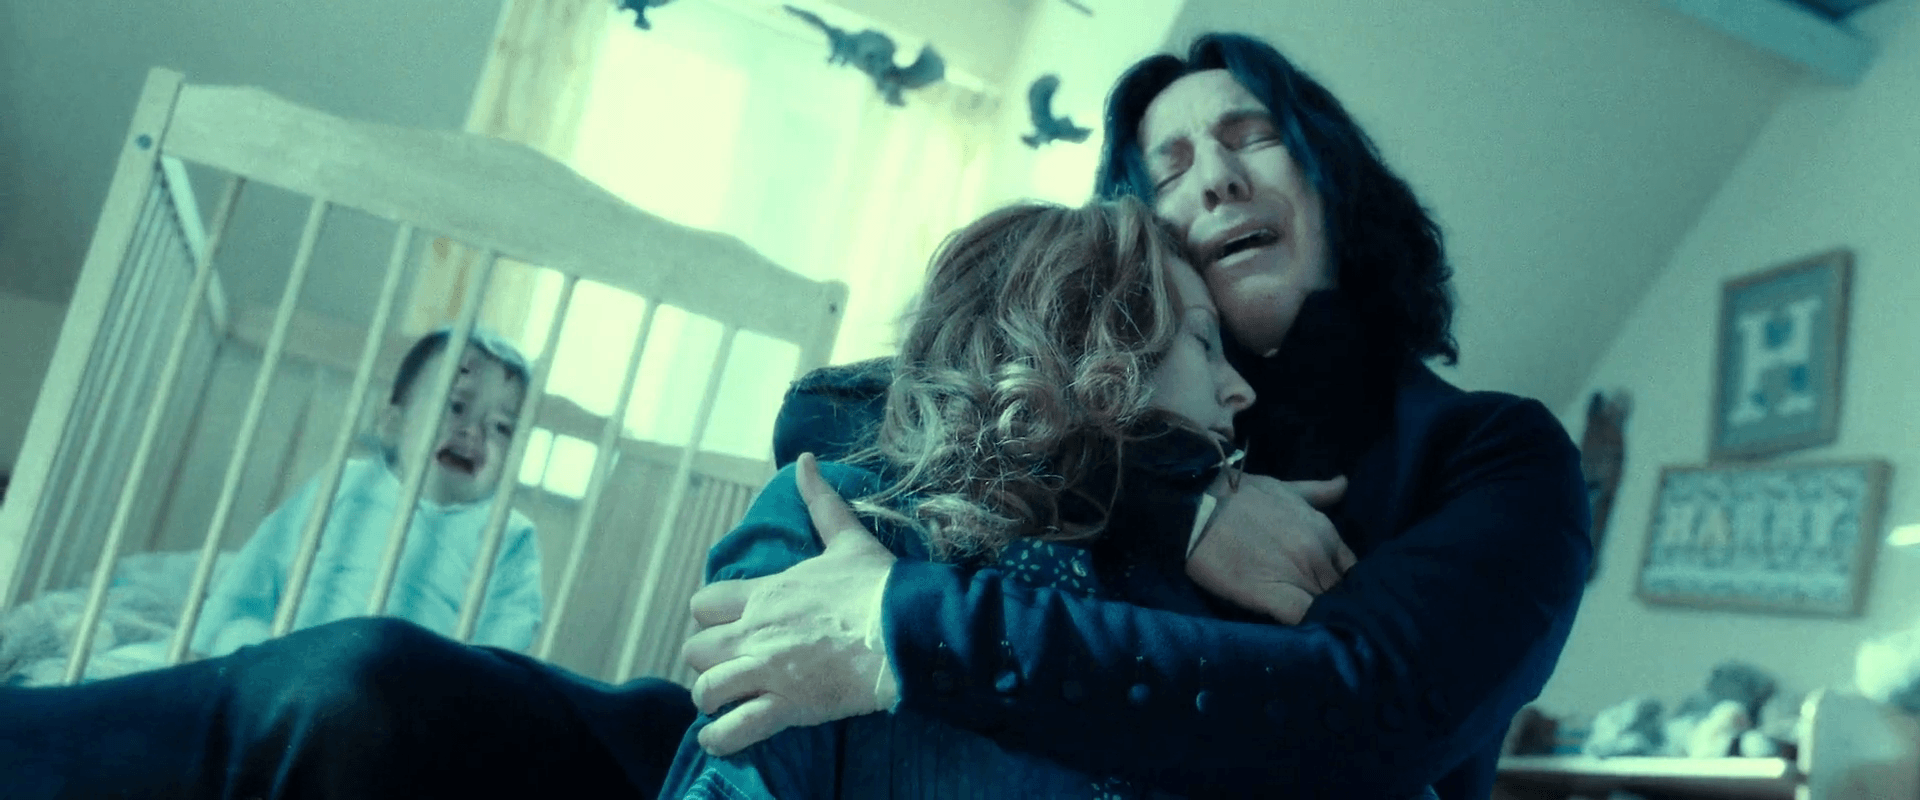 Everything I Need to Know, I Learned From Severus Snape. Deathly